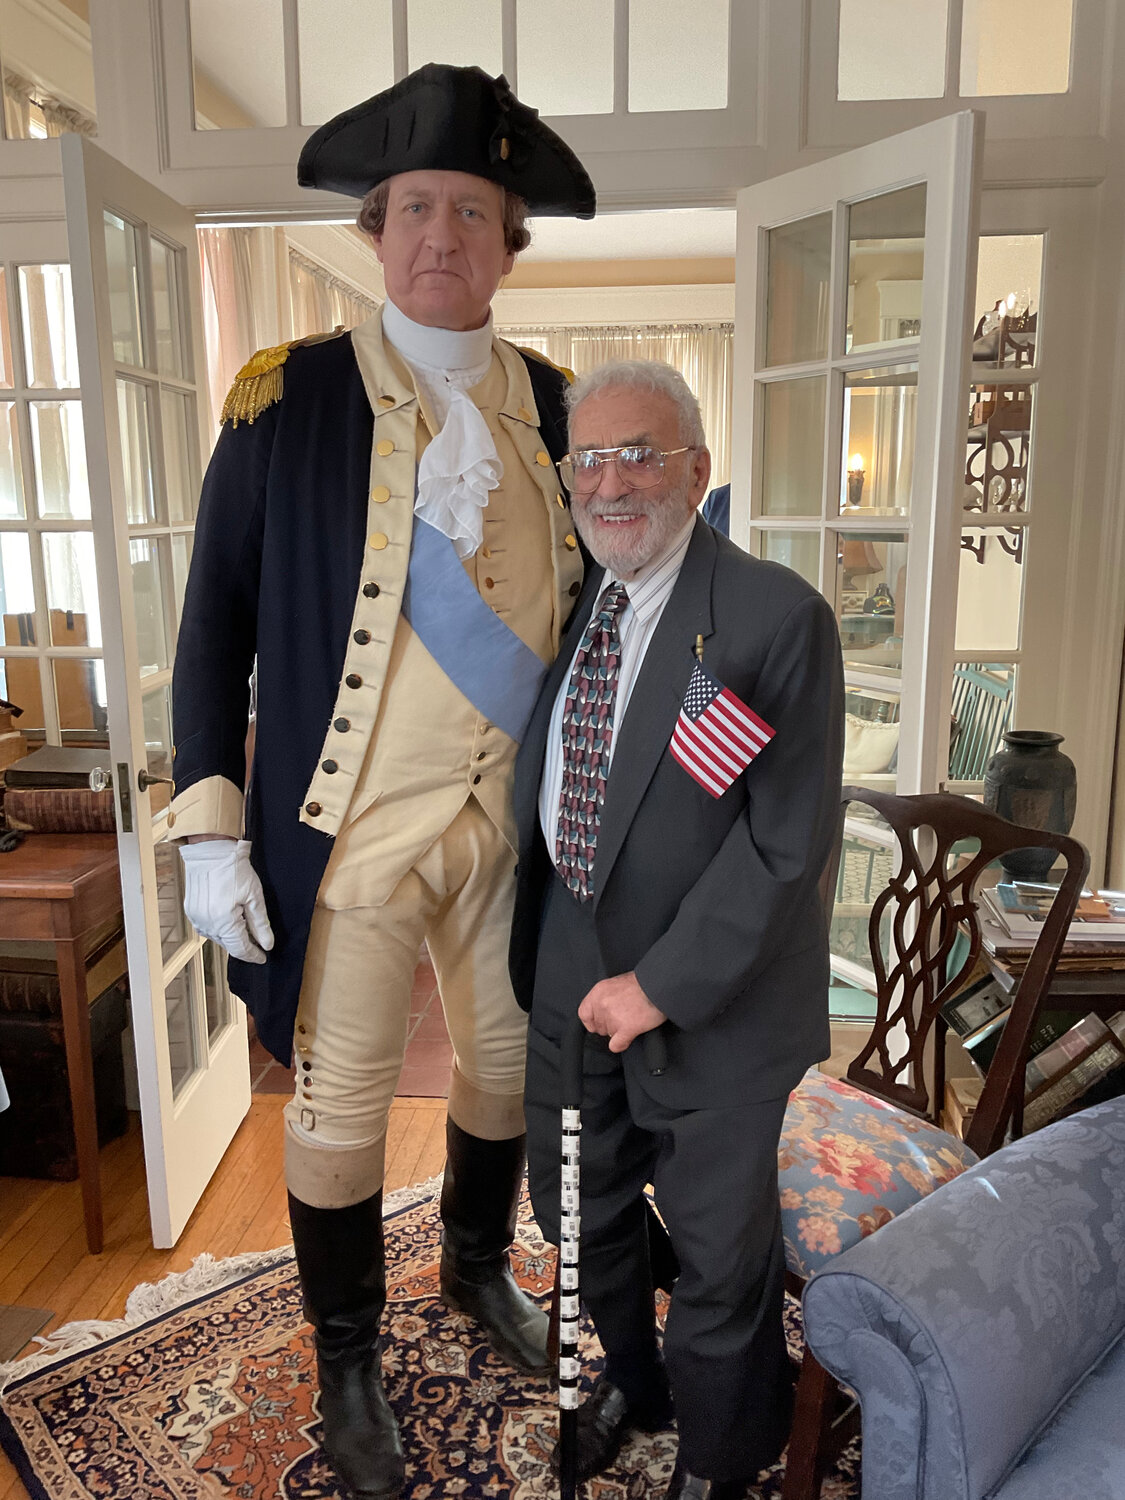 George Washington, portrayed by John Godzieba, stands with 99-year-old Joseph D’Emidio, a U.S. Navy veteran from Bristol. D’Emidio served on the boats going into Normandy and also at the Battle of the Bulge during World War II.